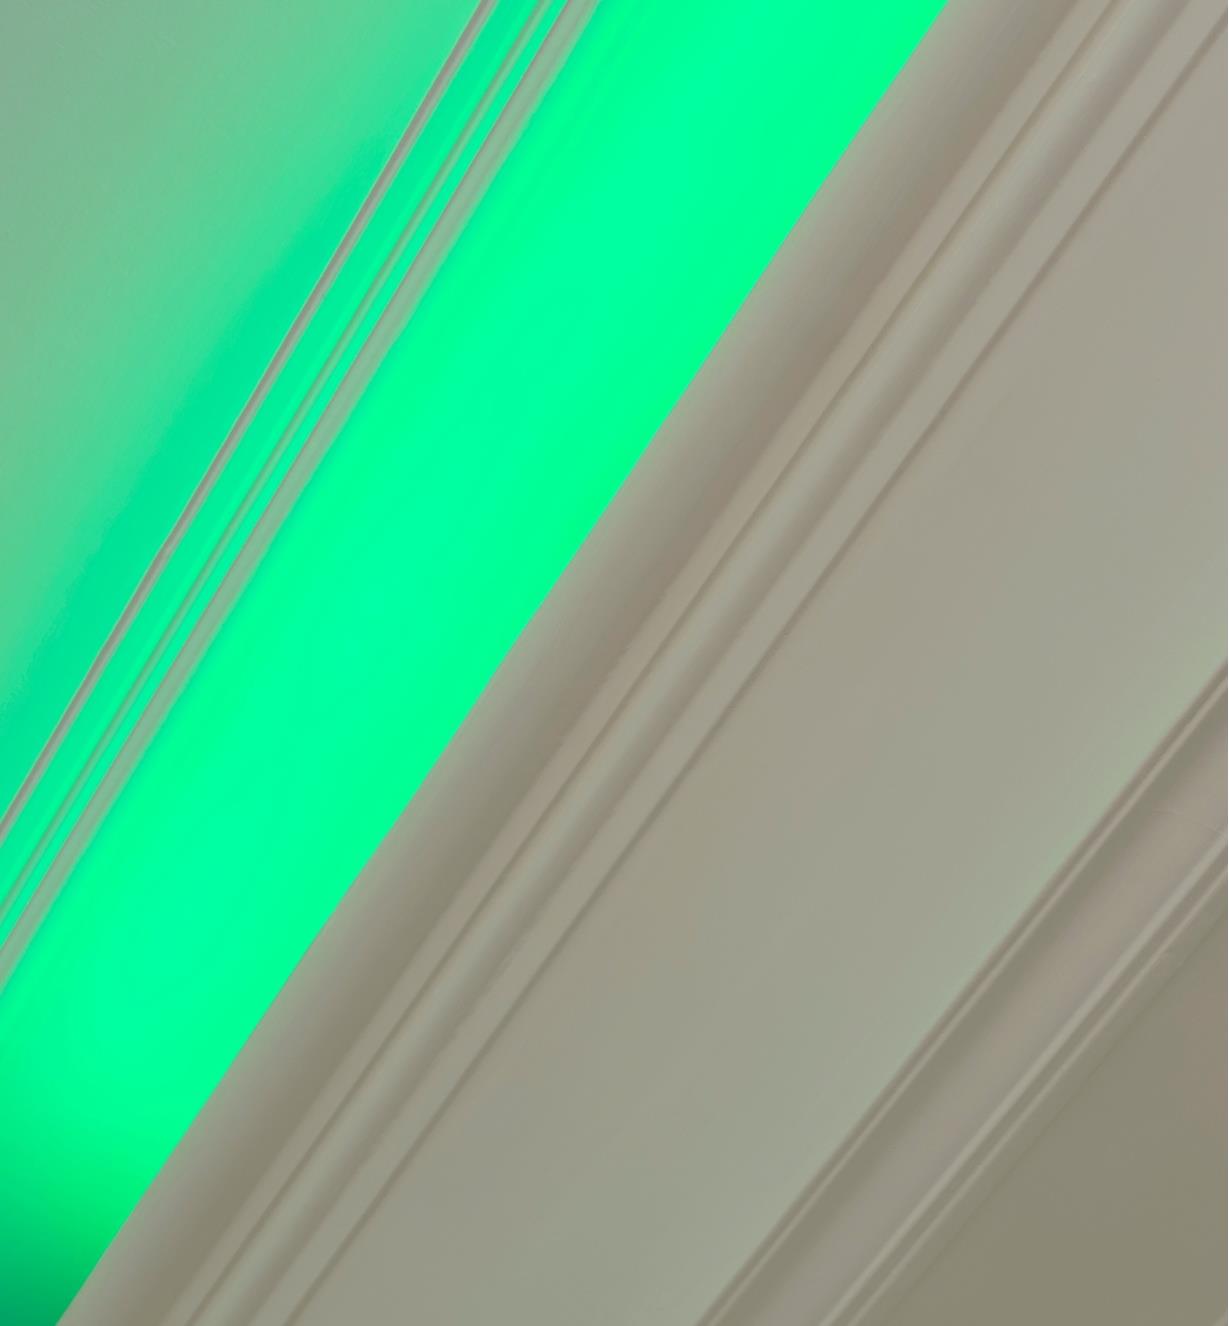 A section of crown molding casting a green glow on the ceiling